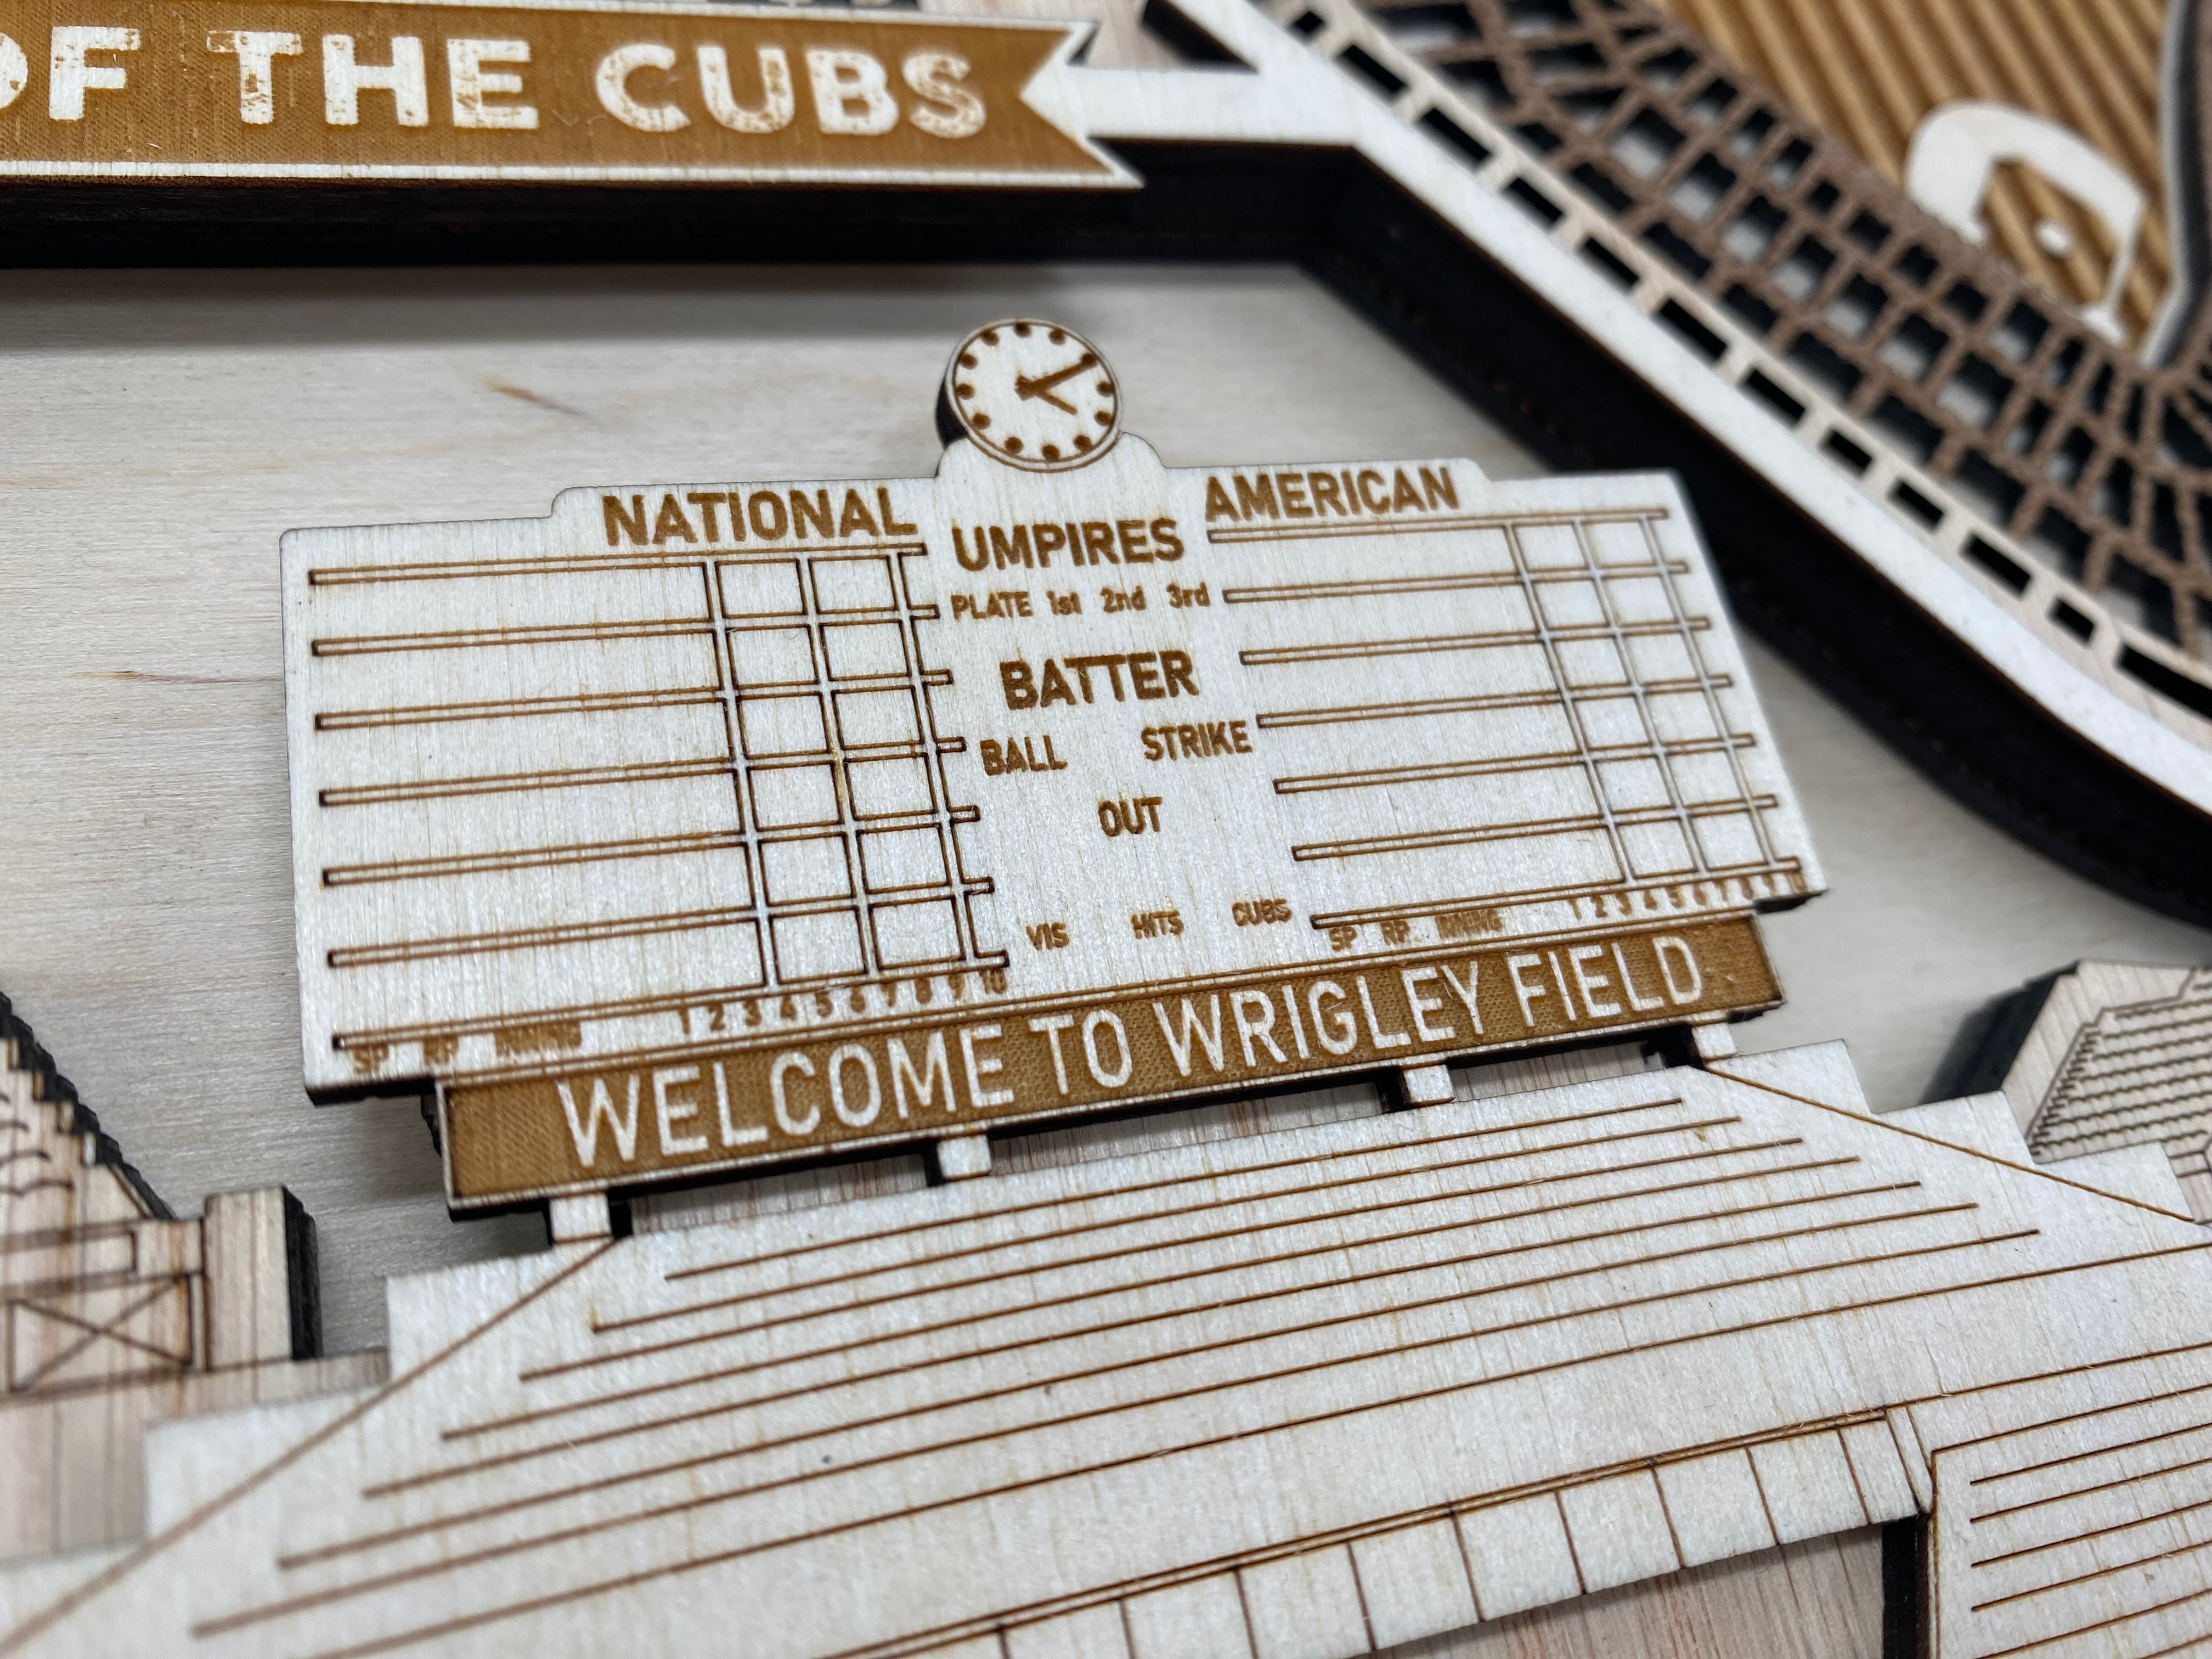 Wrigley Field - Home of the Chicago Cubs - Layered Wooden Stadium with the Inside View of the Ballpark